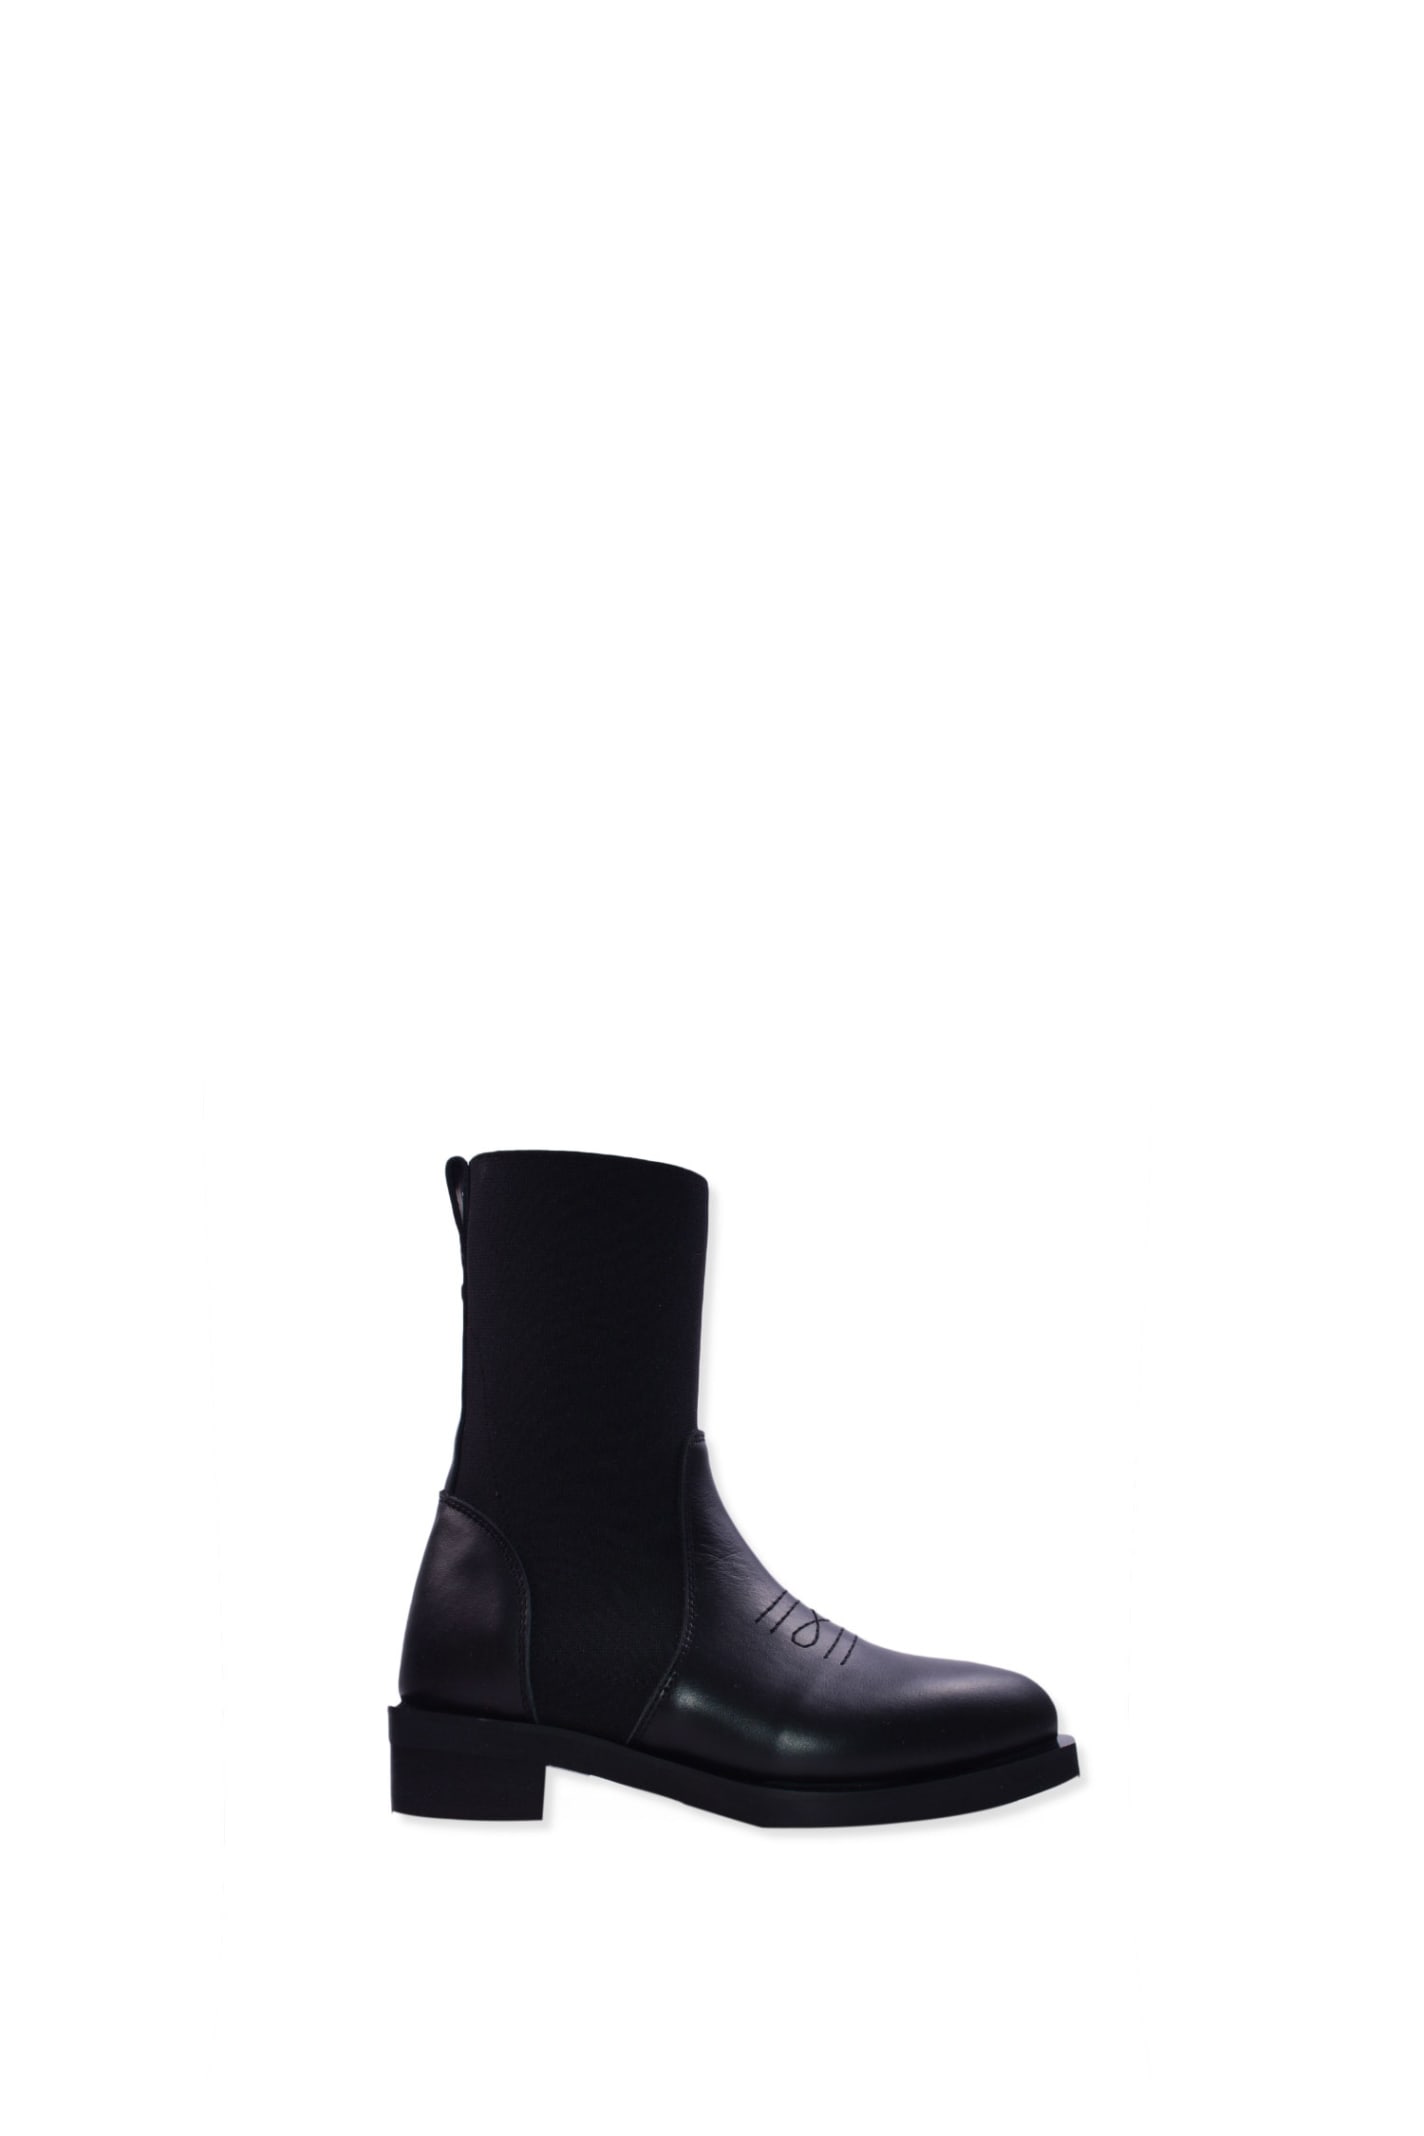 N°21 LEATHER ANKLE BOOT